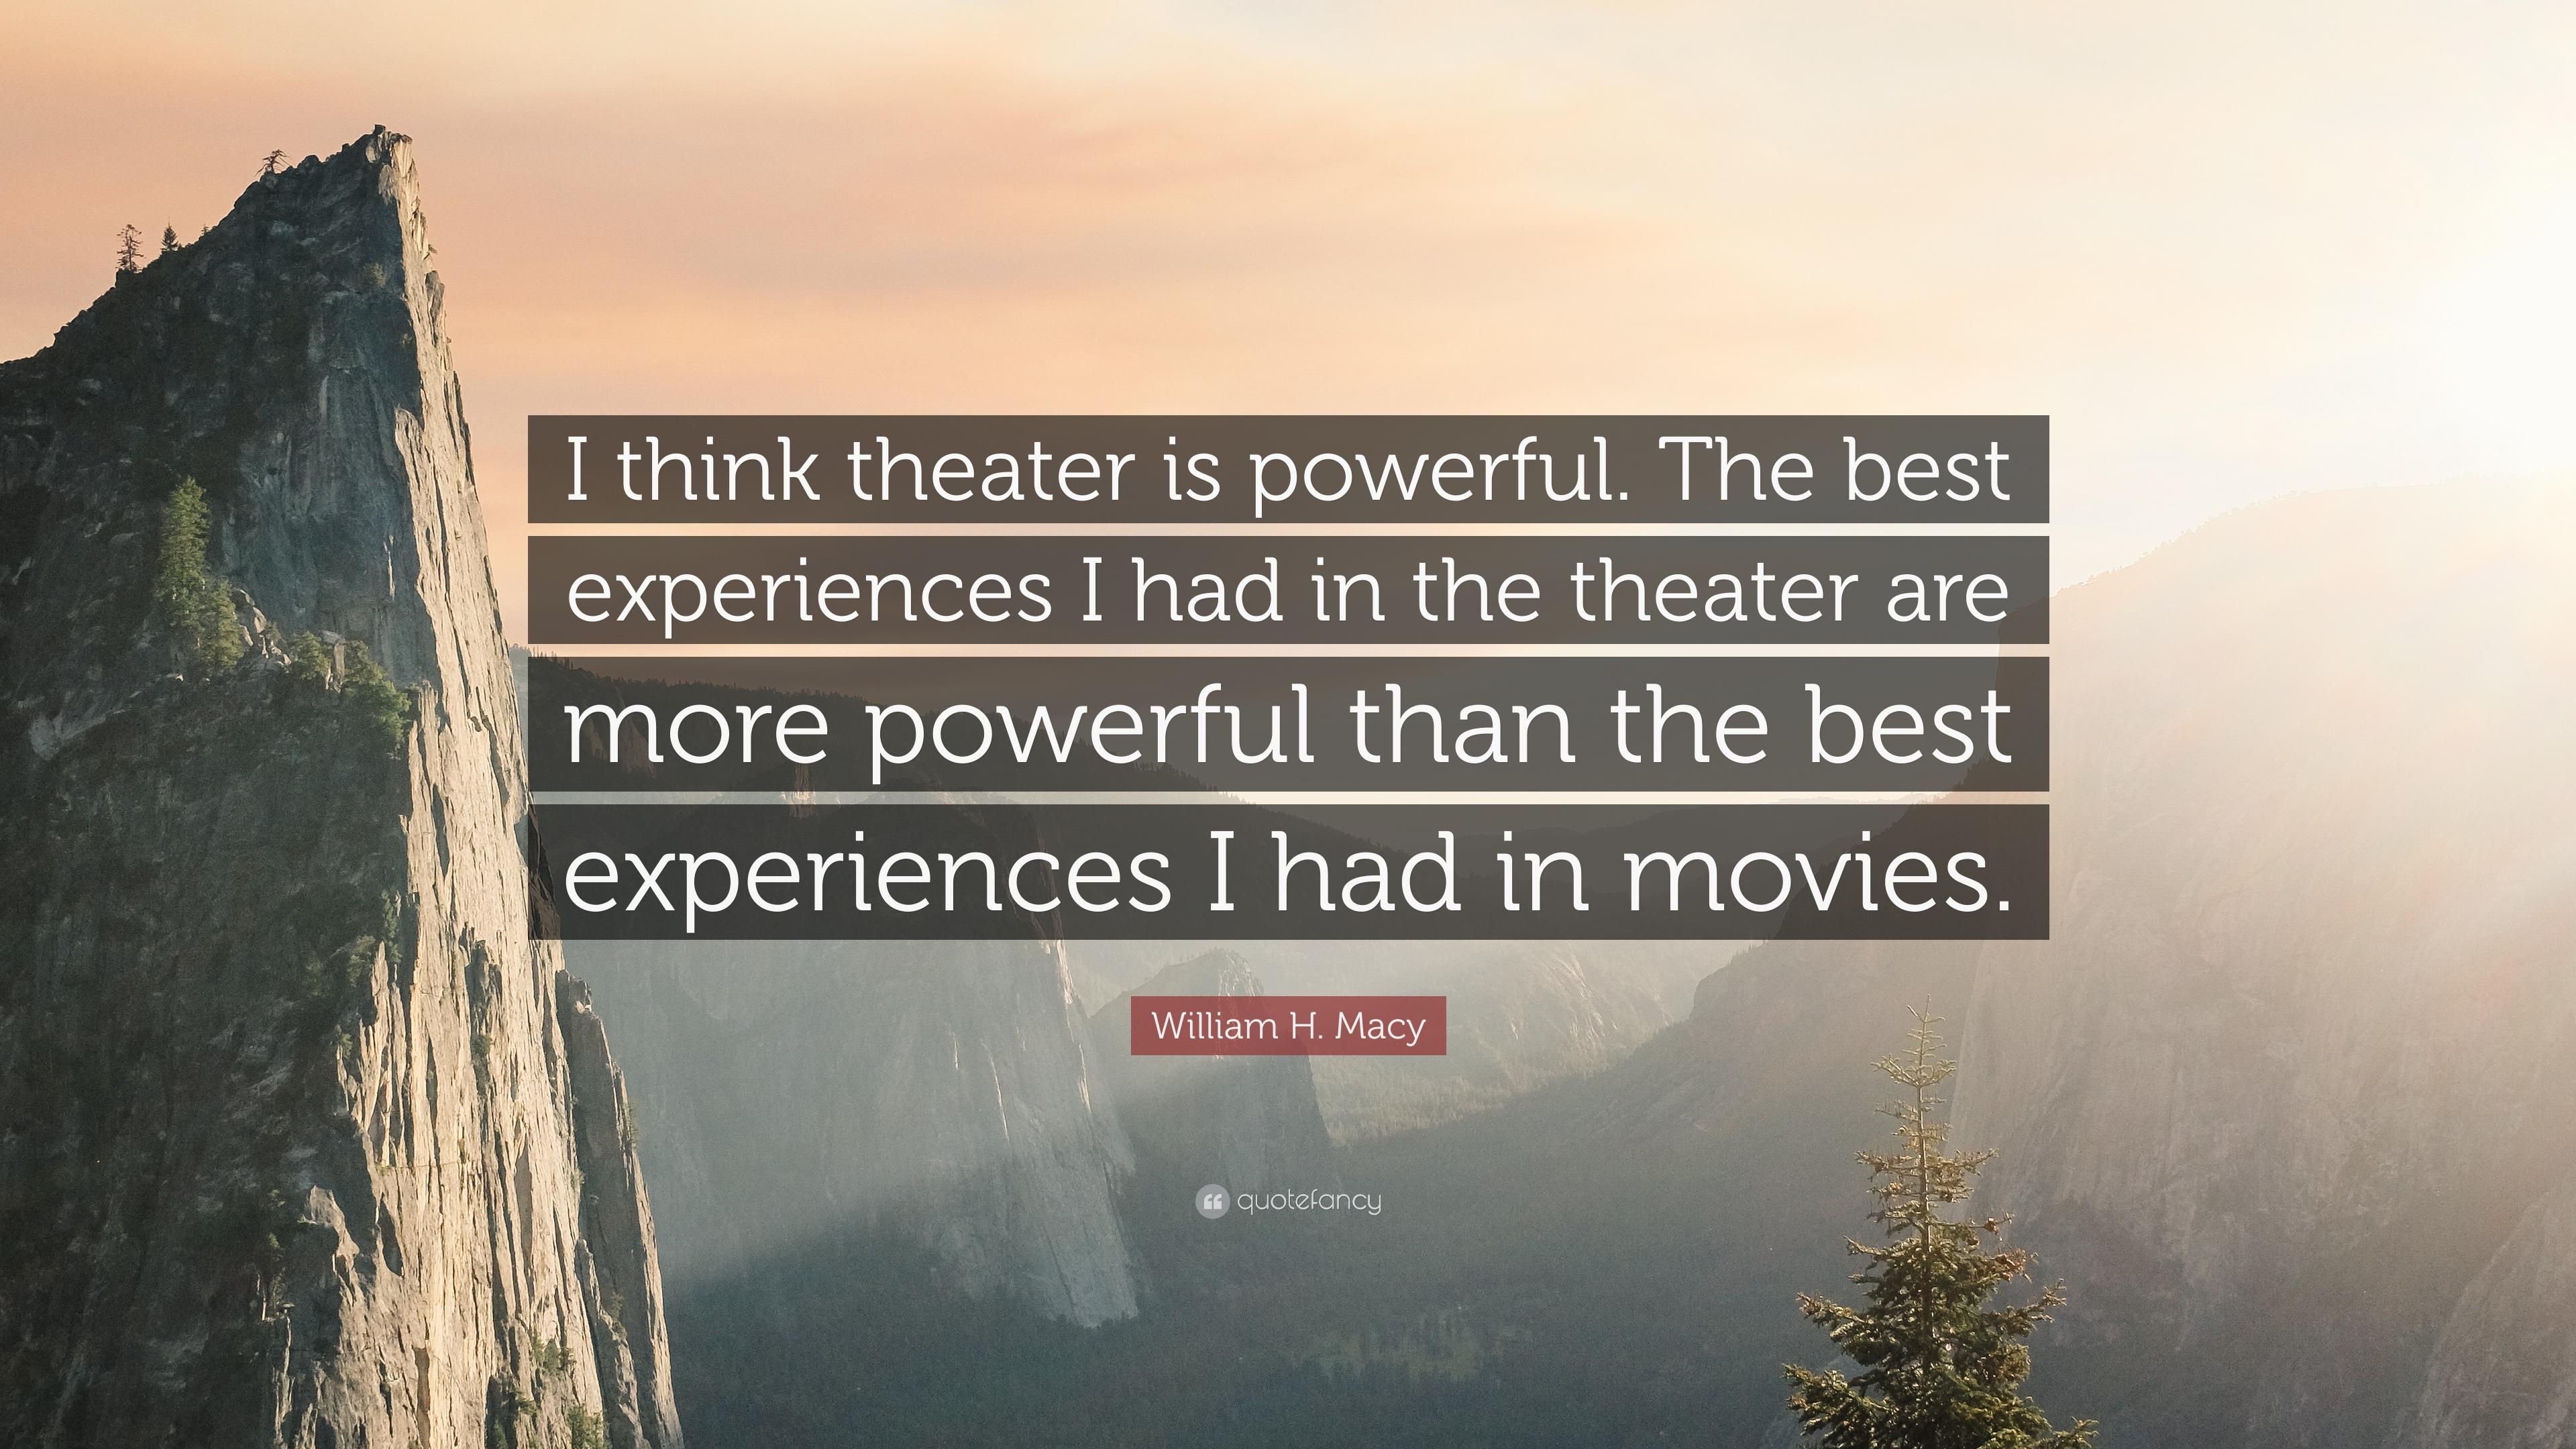 William H. Macy Quote: “I think theater is powerful. The best